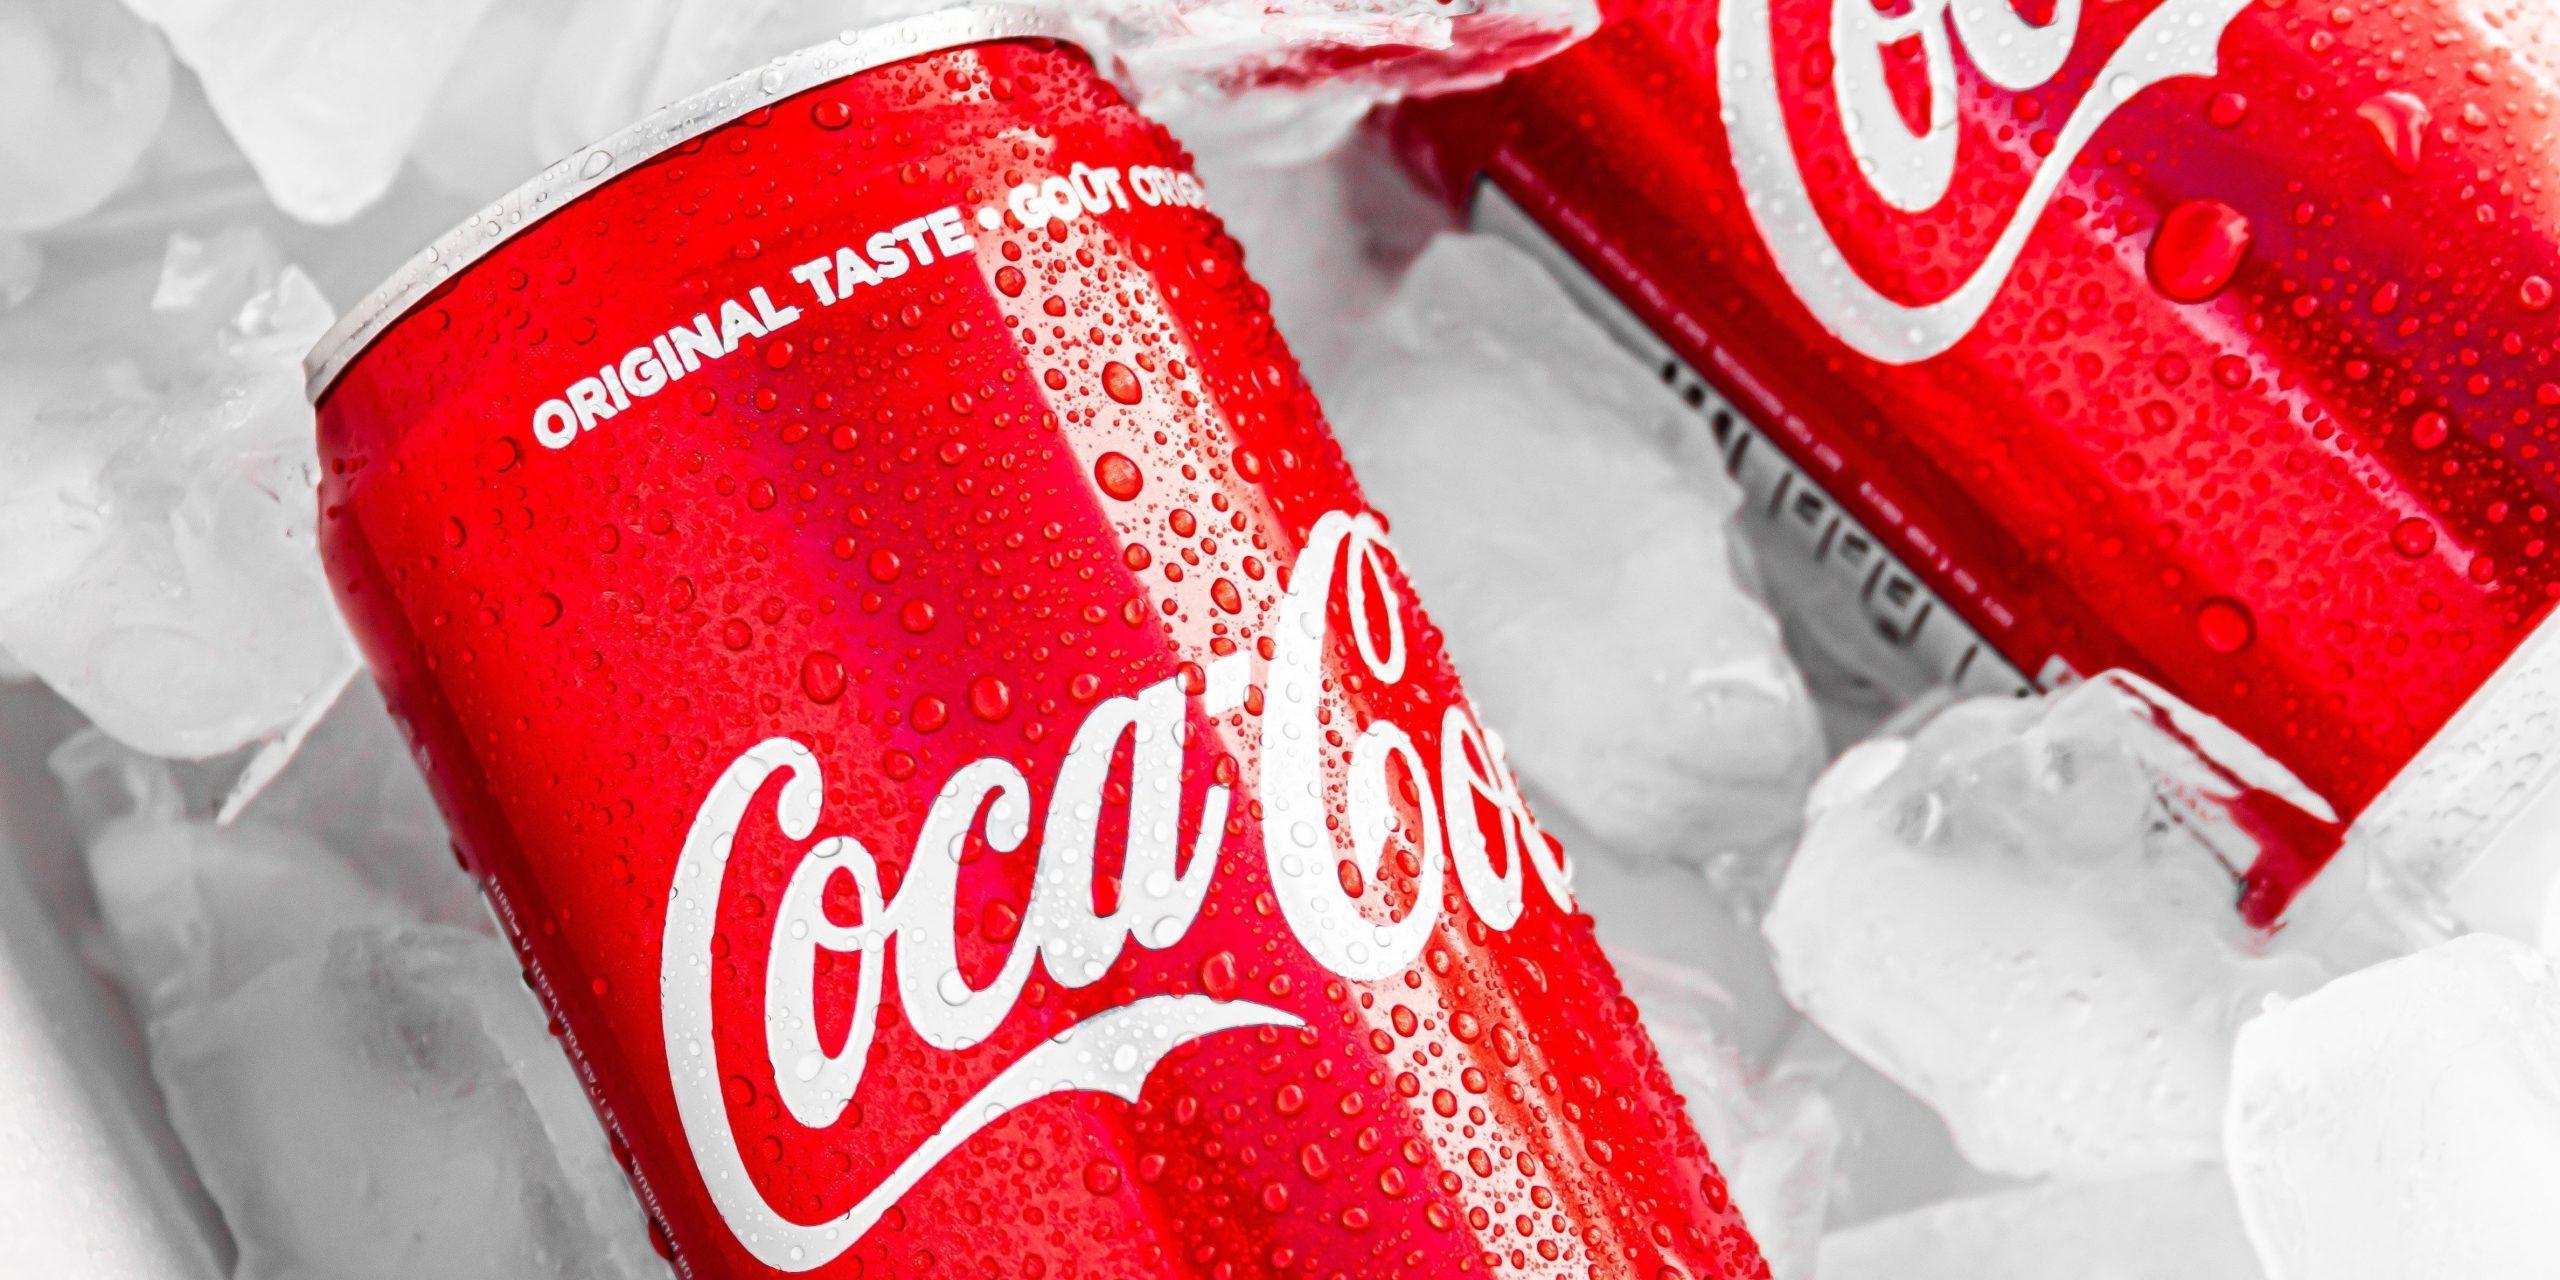 Two Coca-Cola cans on ice used to demonstrate effective brand storytelling efforts.